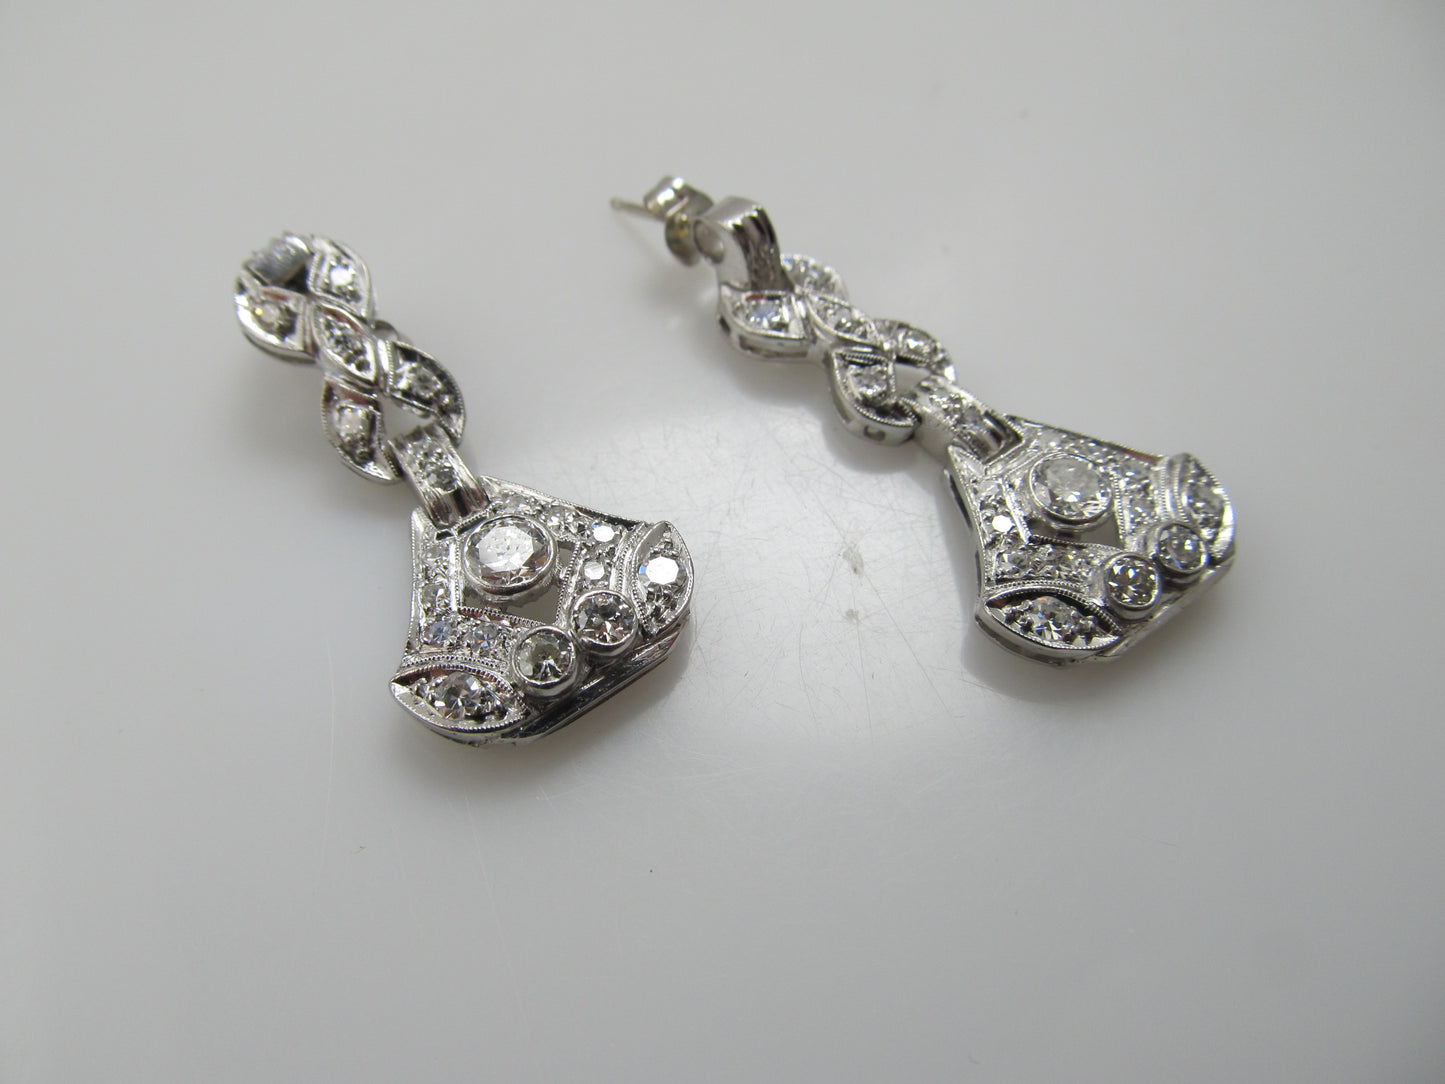 Vintage platinum drop earrings with 2cts in diamonds